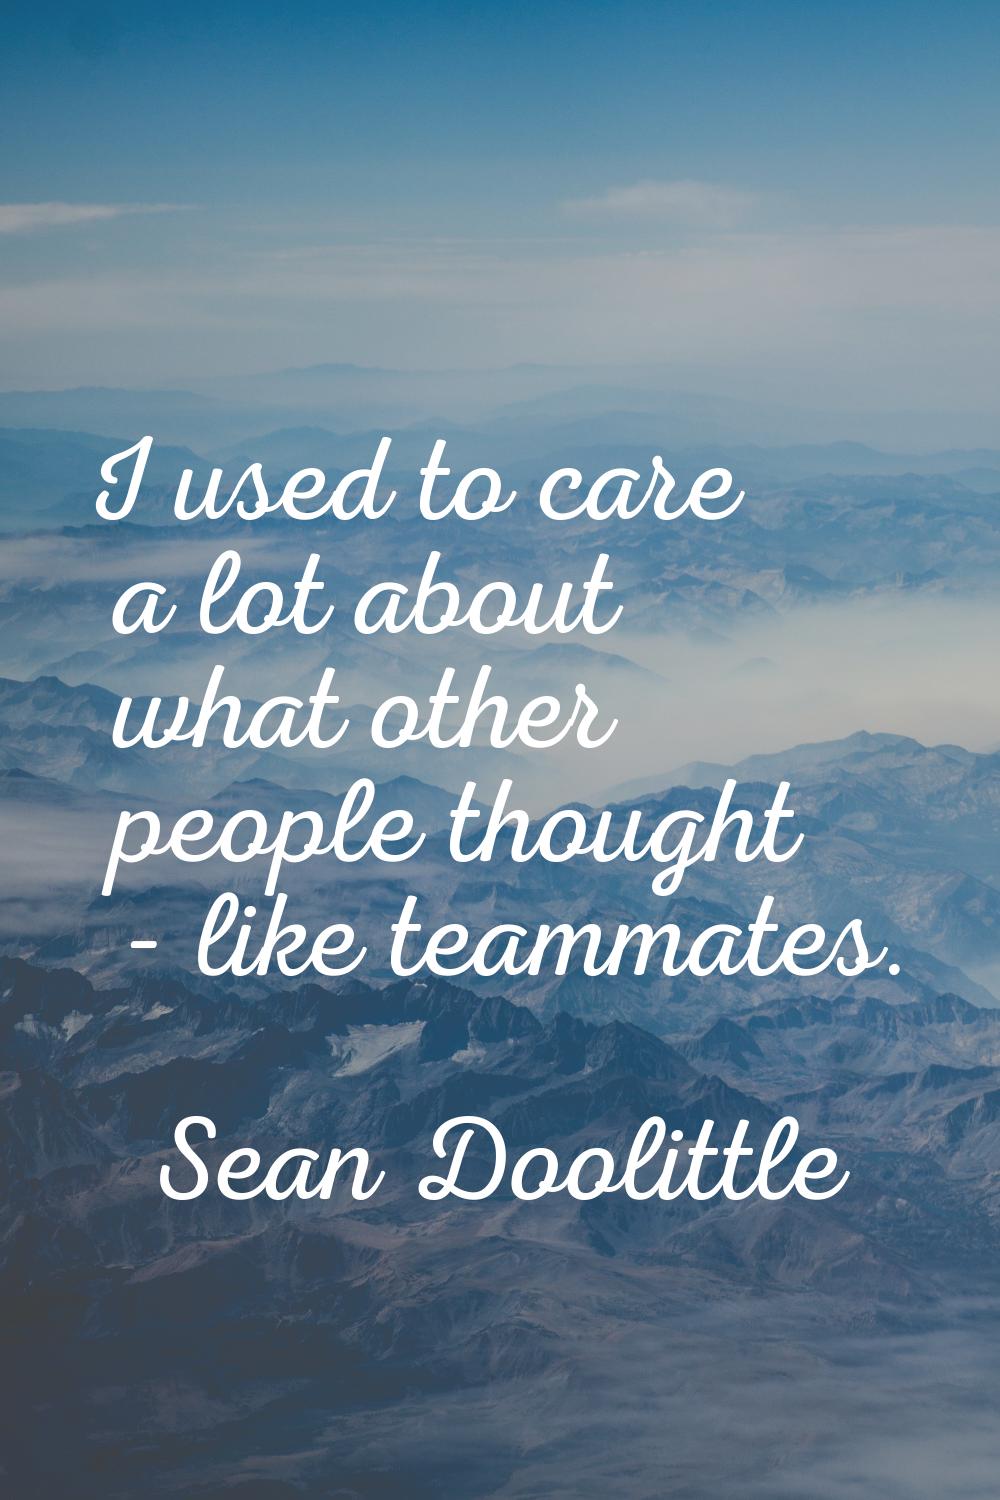 I used to care a lot about what other people thought - like teammates.